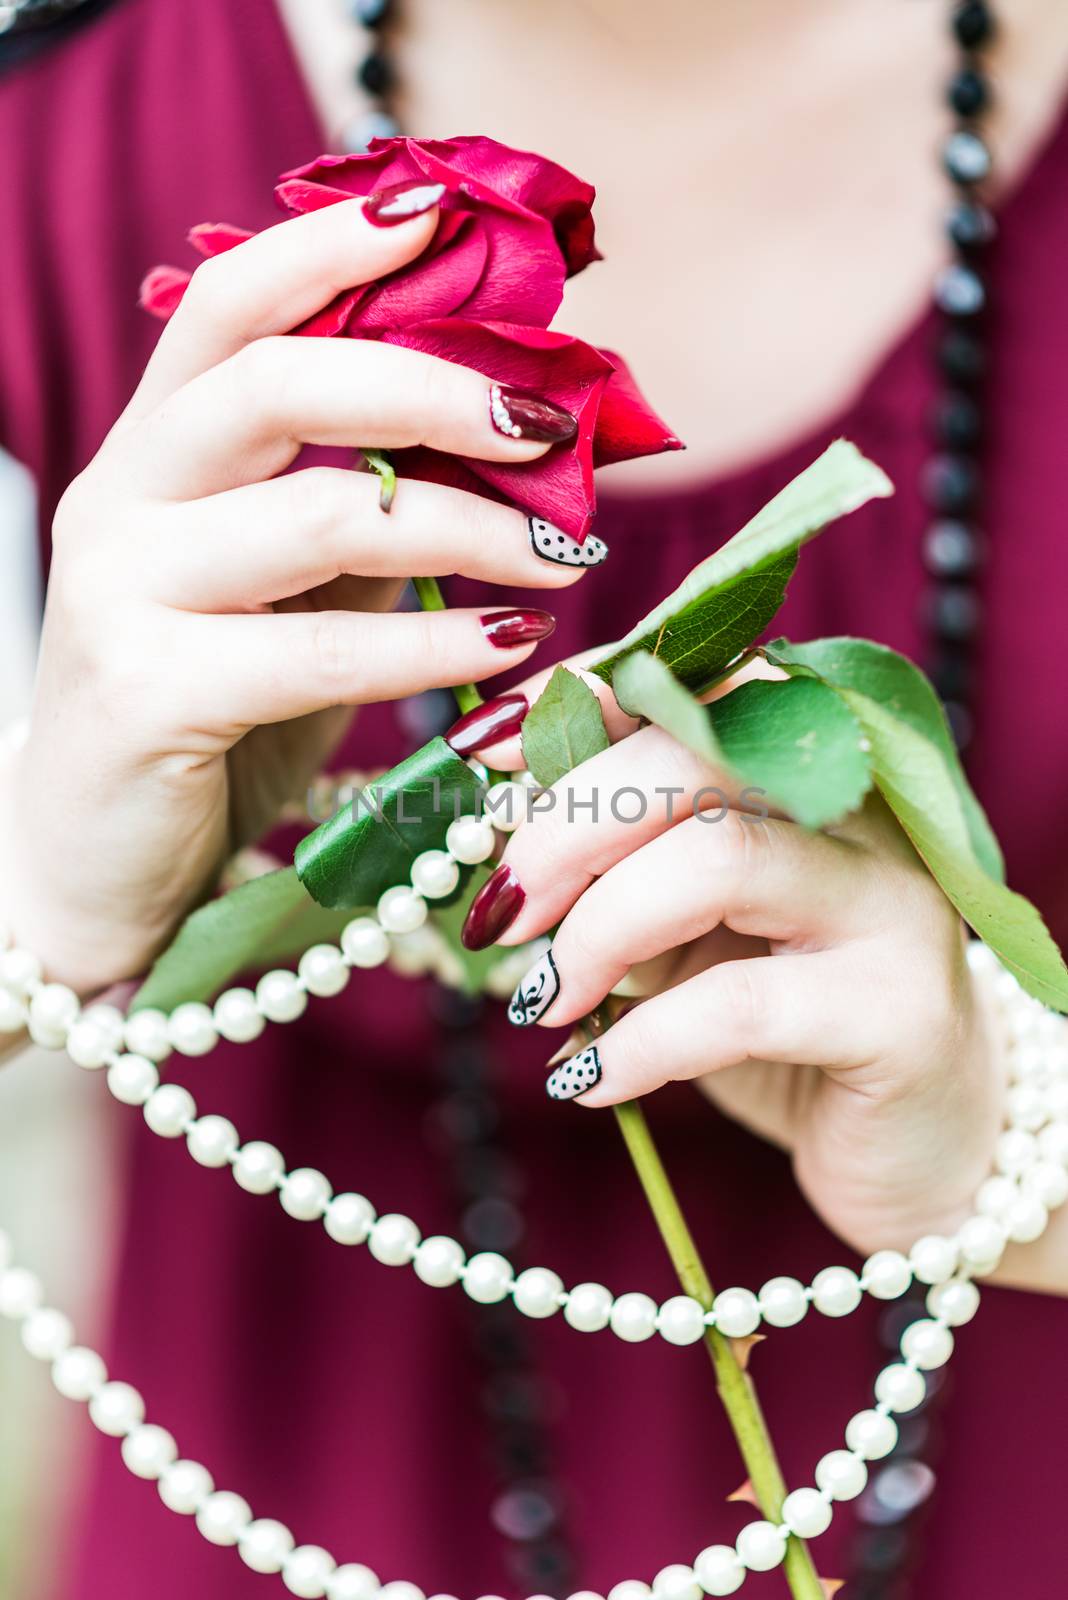 beautiful hand of a young woman with brown manicure holding red rose white pearl necklace